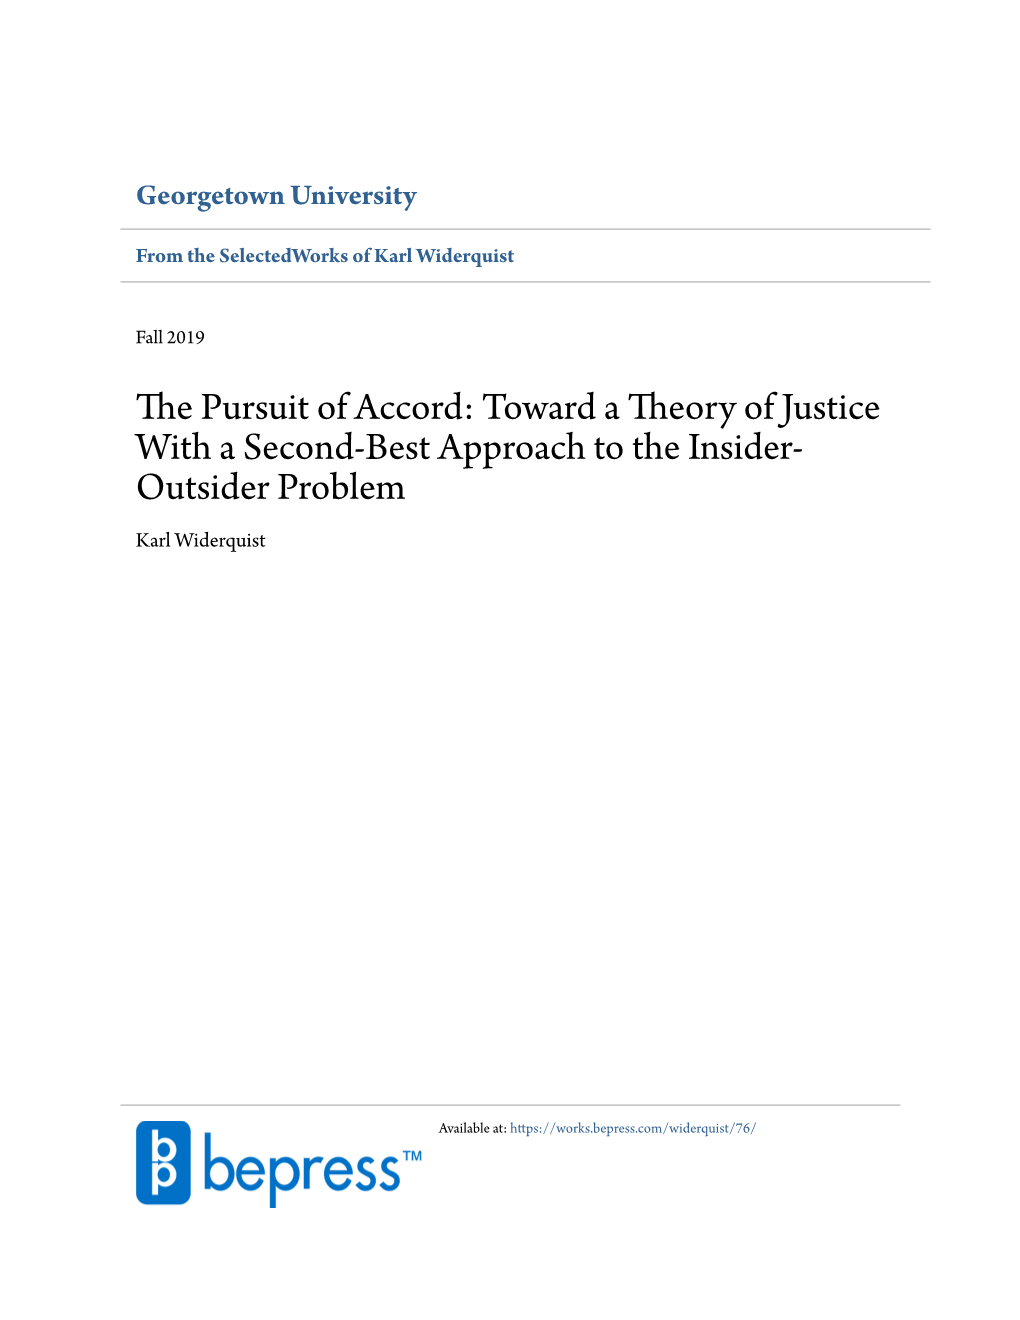 The Pursuit of Accord: Toward a Theory of Justice with a Second-Best Approach to the Insider-Outsider Problem